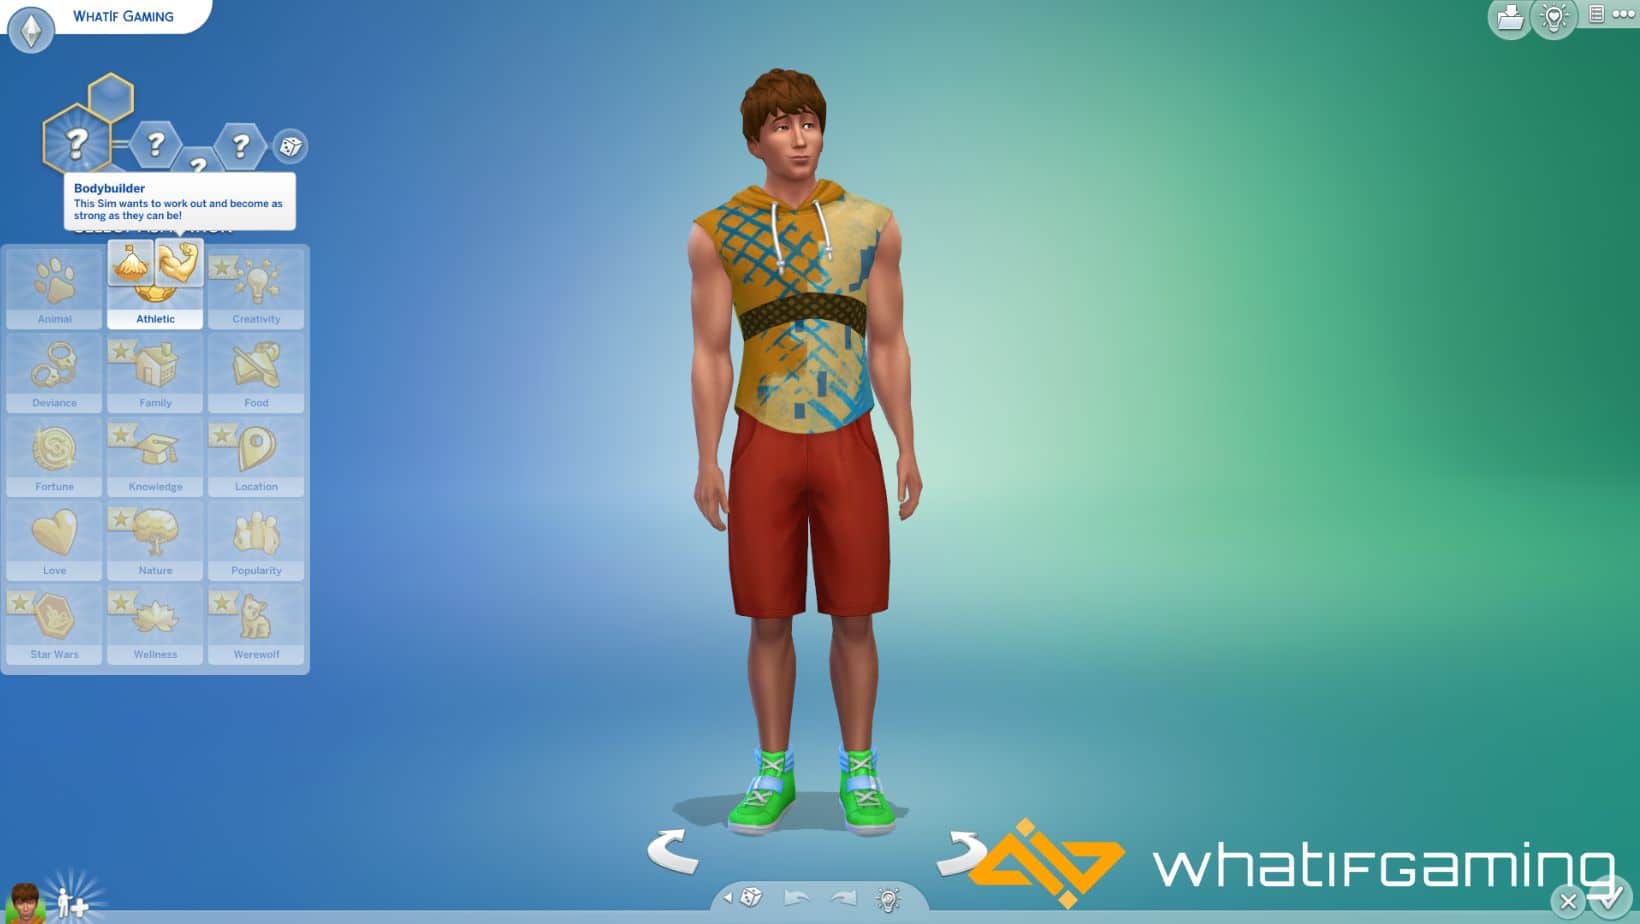 The Bodybuilder Aspiration will allow your sim to easily progress their the Fitness skill.